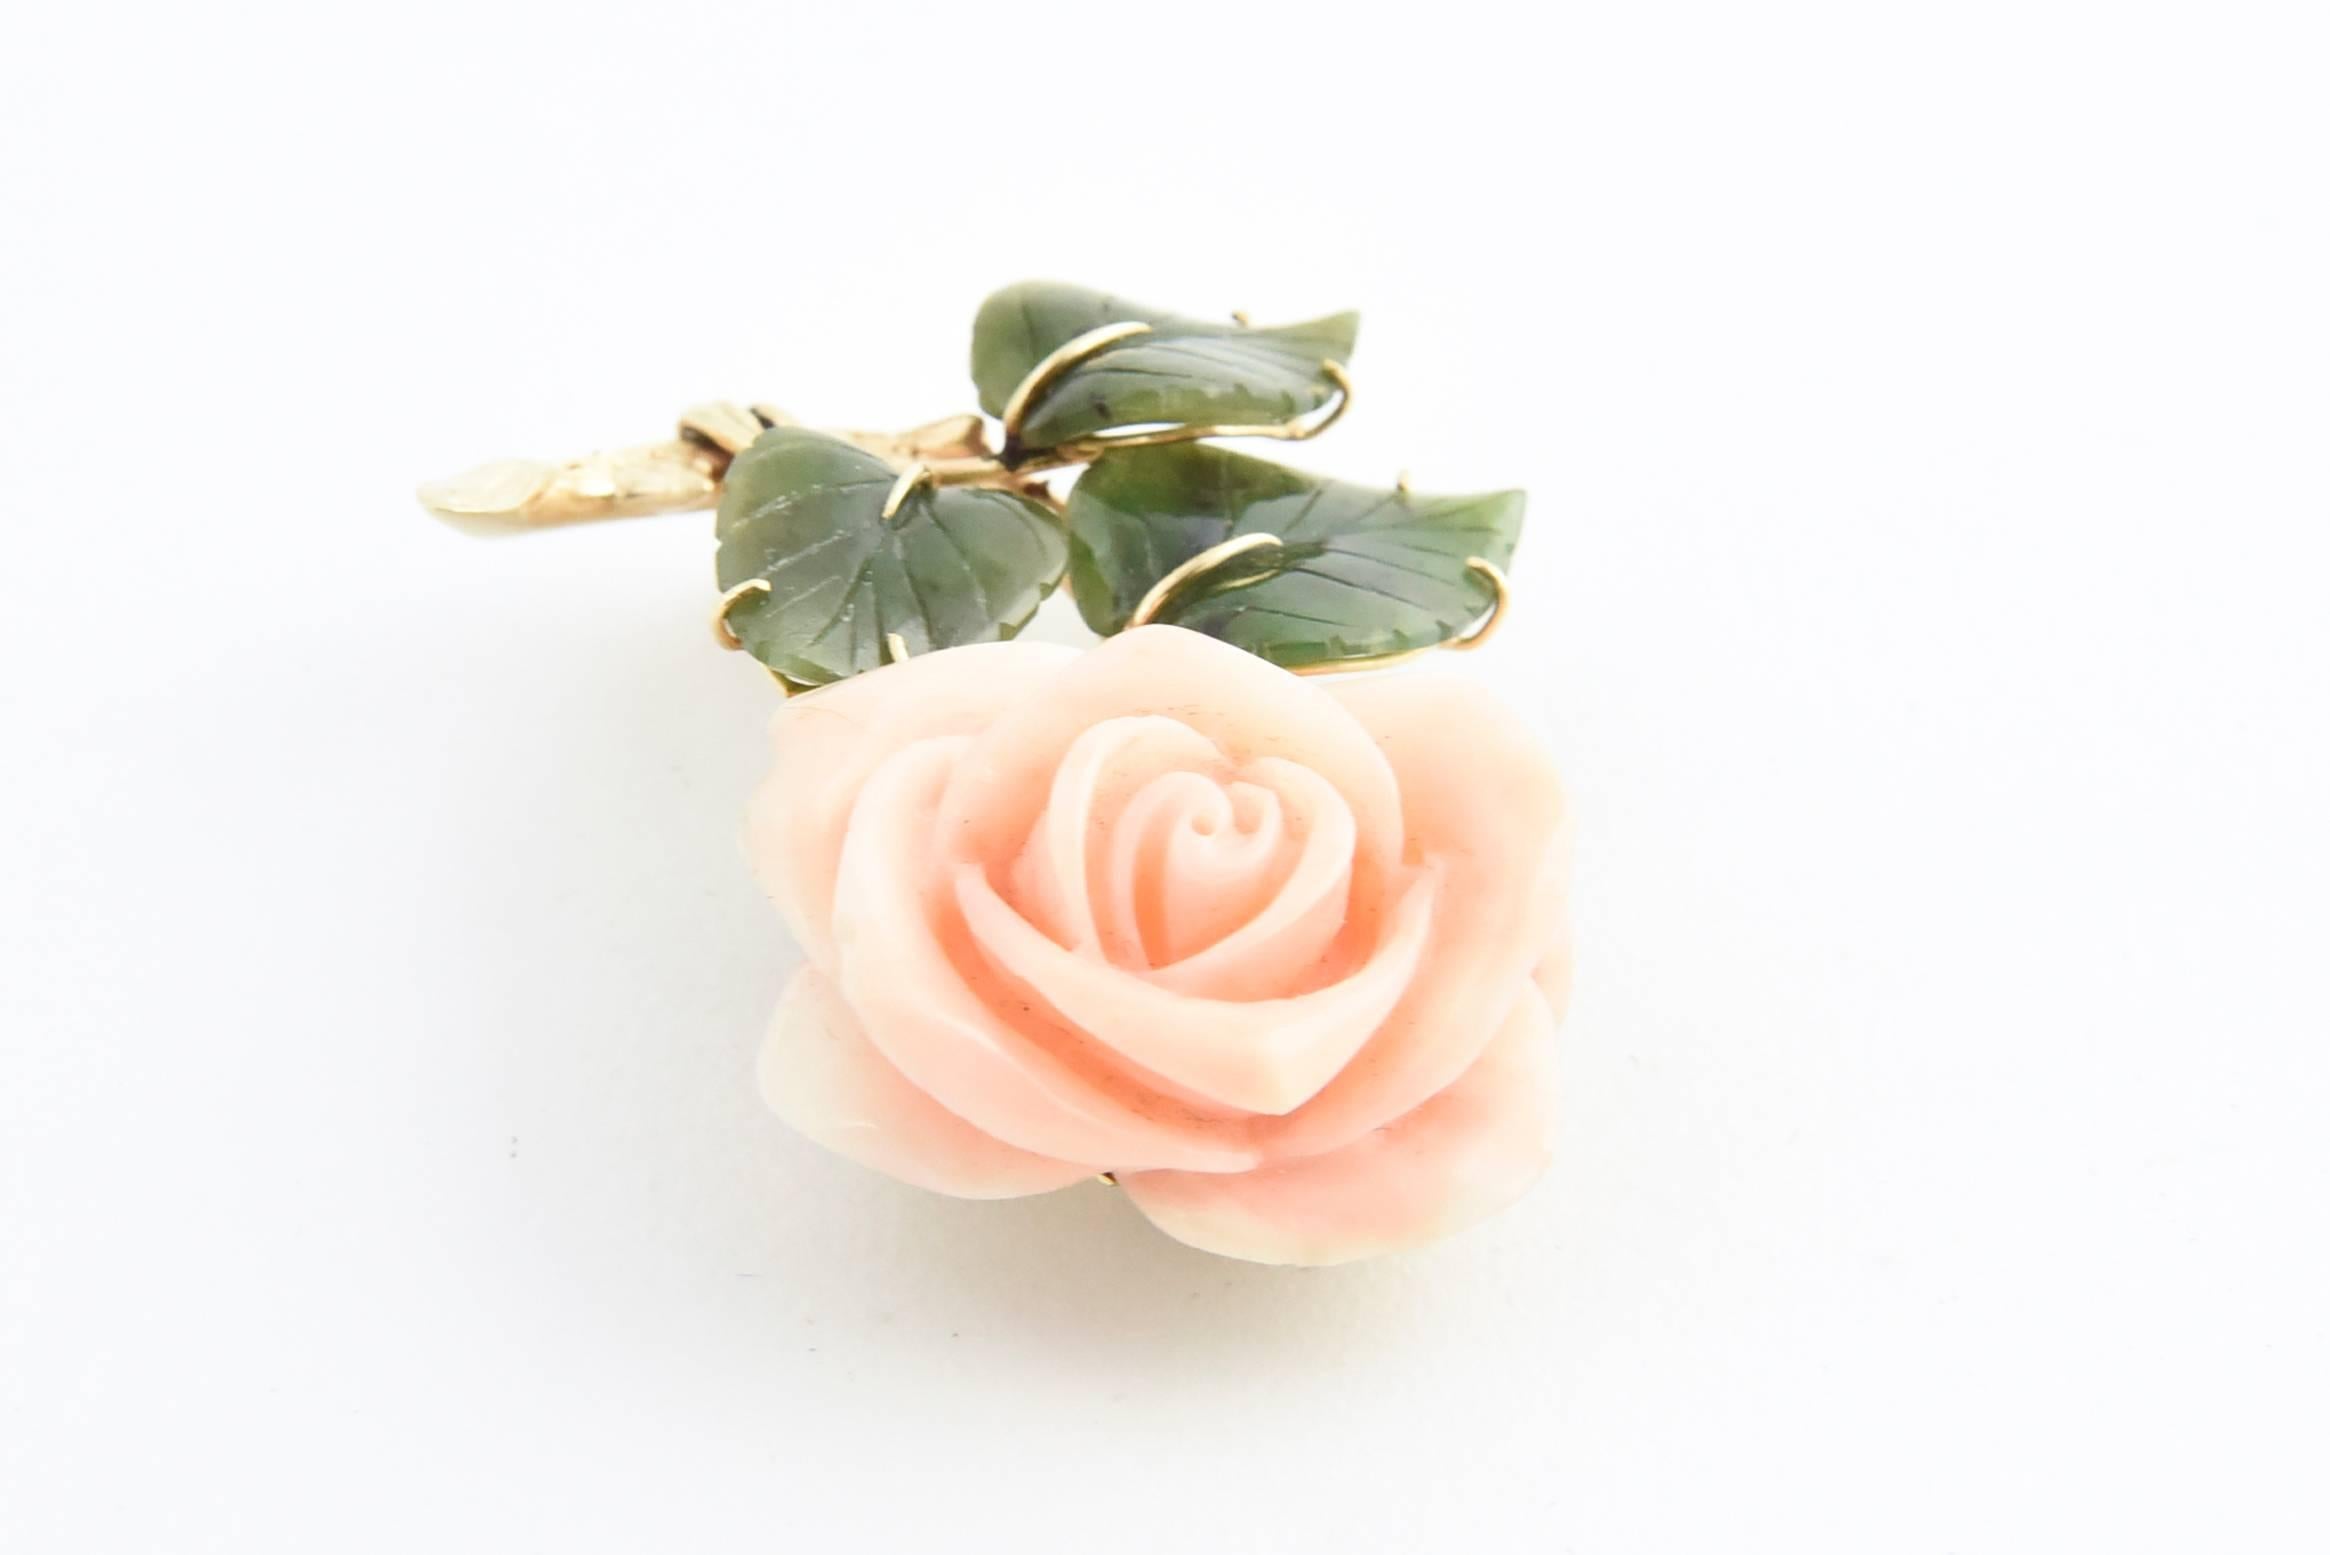 Rose Cut Coral Rose Flower Gold Brooch with Jade Leaves